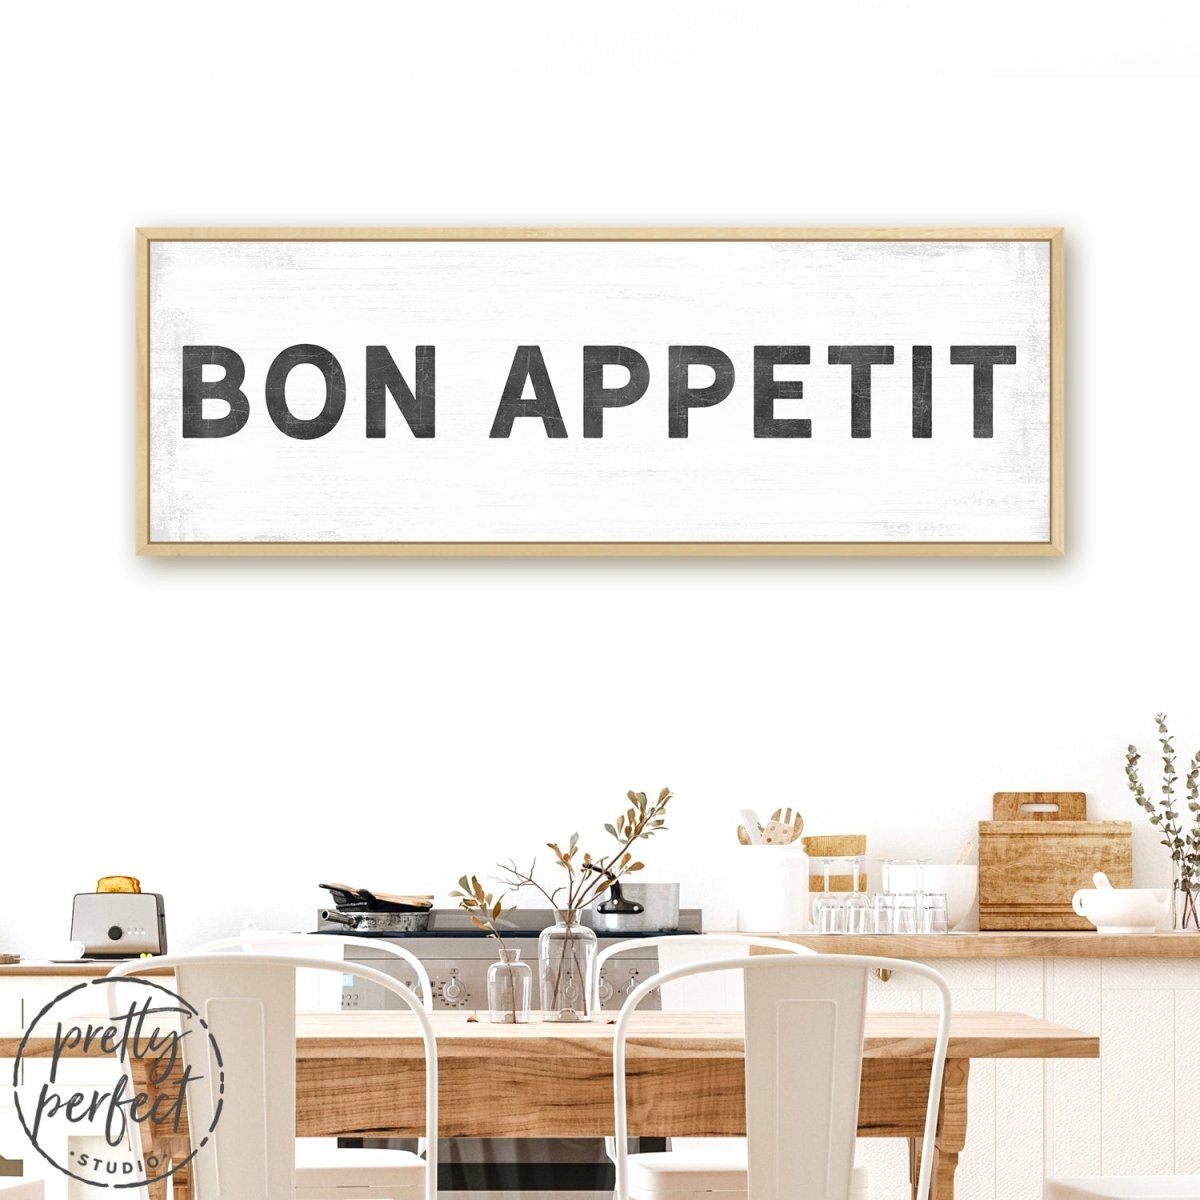 Bon Appetit Large Canvas Sign For Kitchen Or Dining Room Above Table - Pretty Perfect Studio